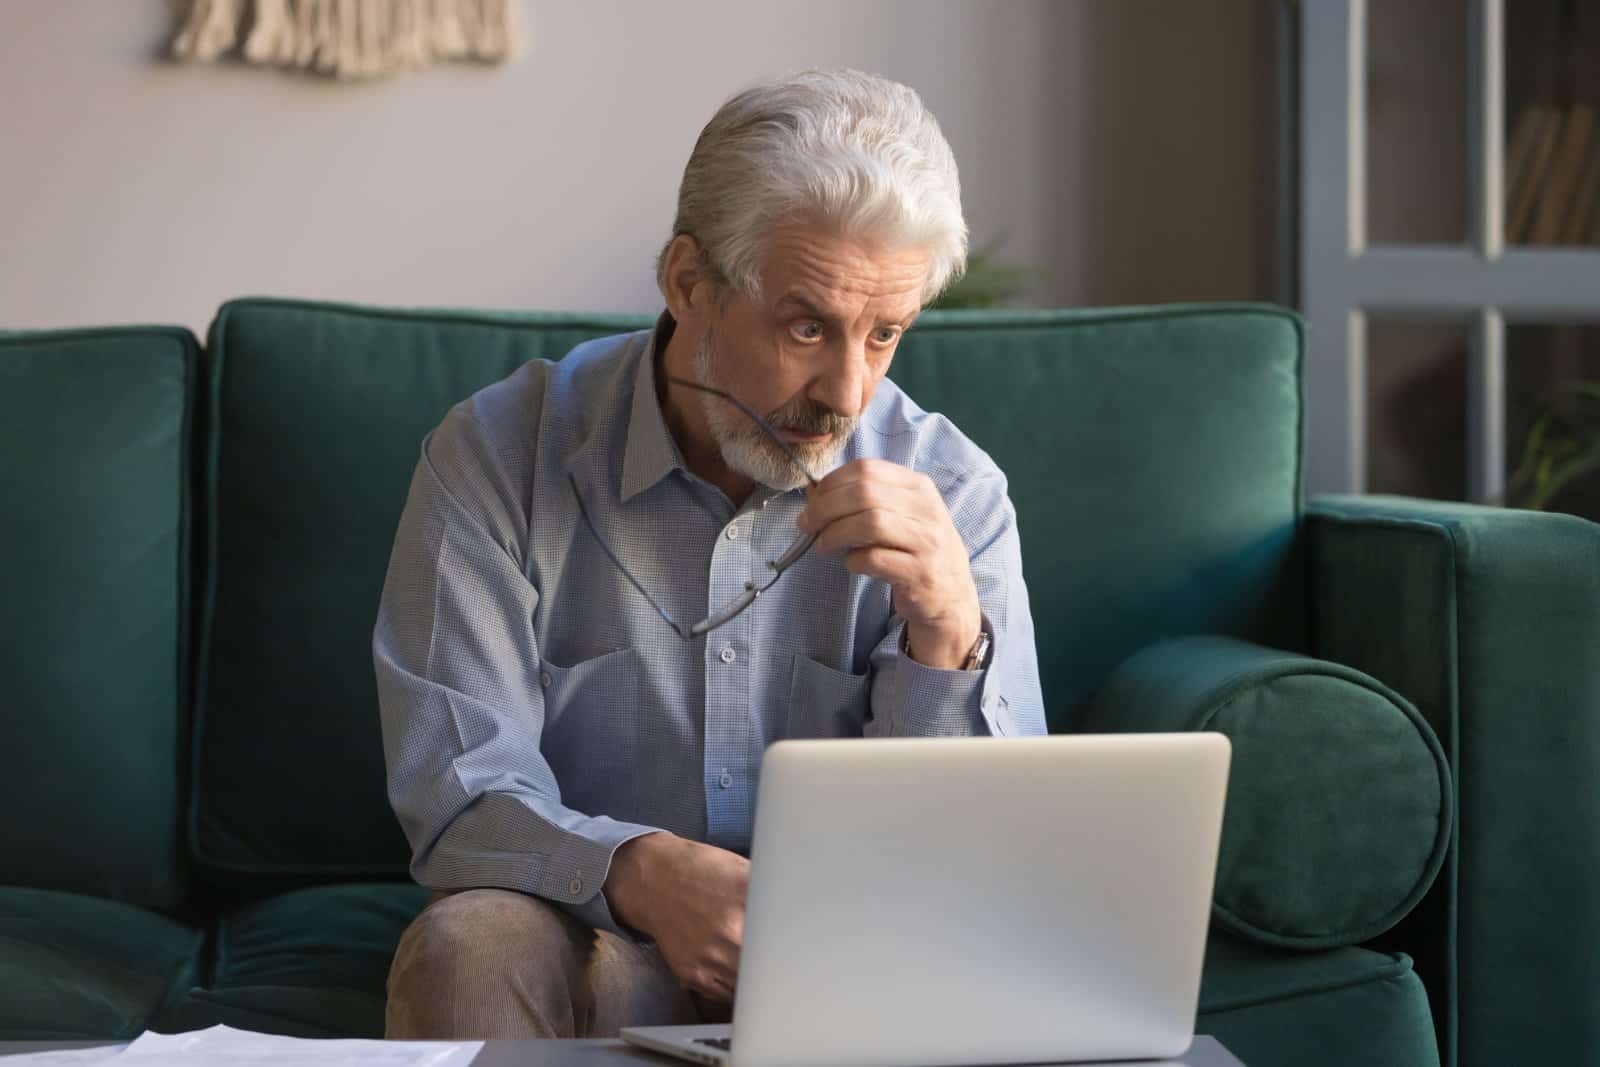 <p class="wp-caption-text">Image Credit: Shutterstock / fizkes</p>  <p>Part of retirement’s allure is the freedom to make spur-of-the-moment travel decisions. With a delayed retirement age, your spontaneity is shackled to the workplace, where the only surprise is what’s in the break room fridge.</p>